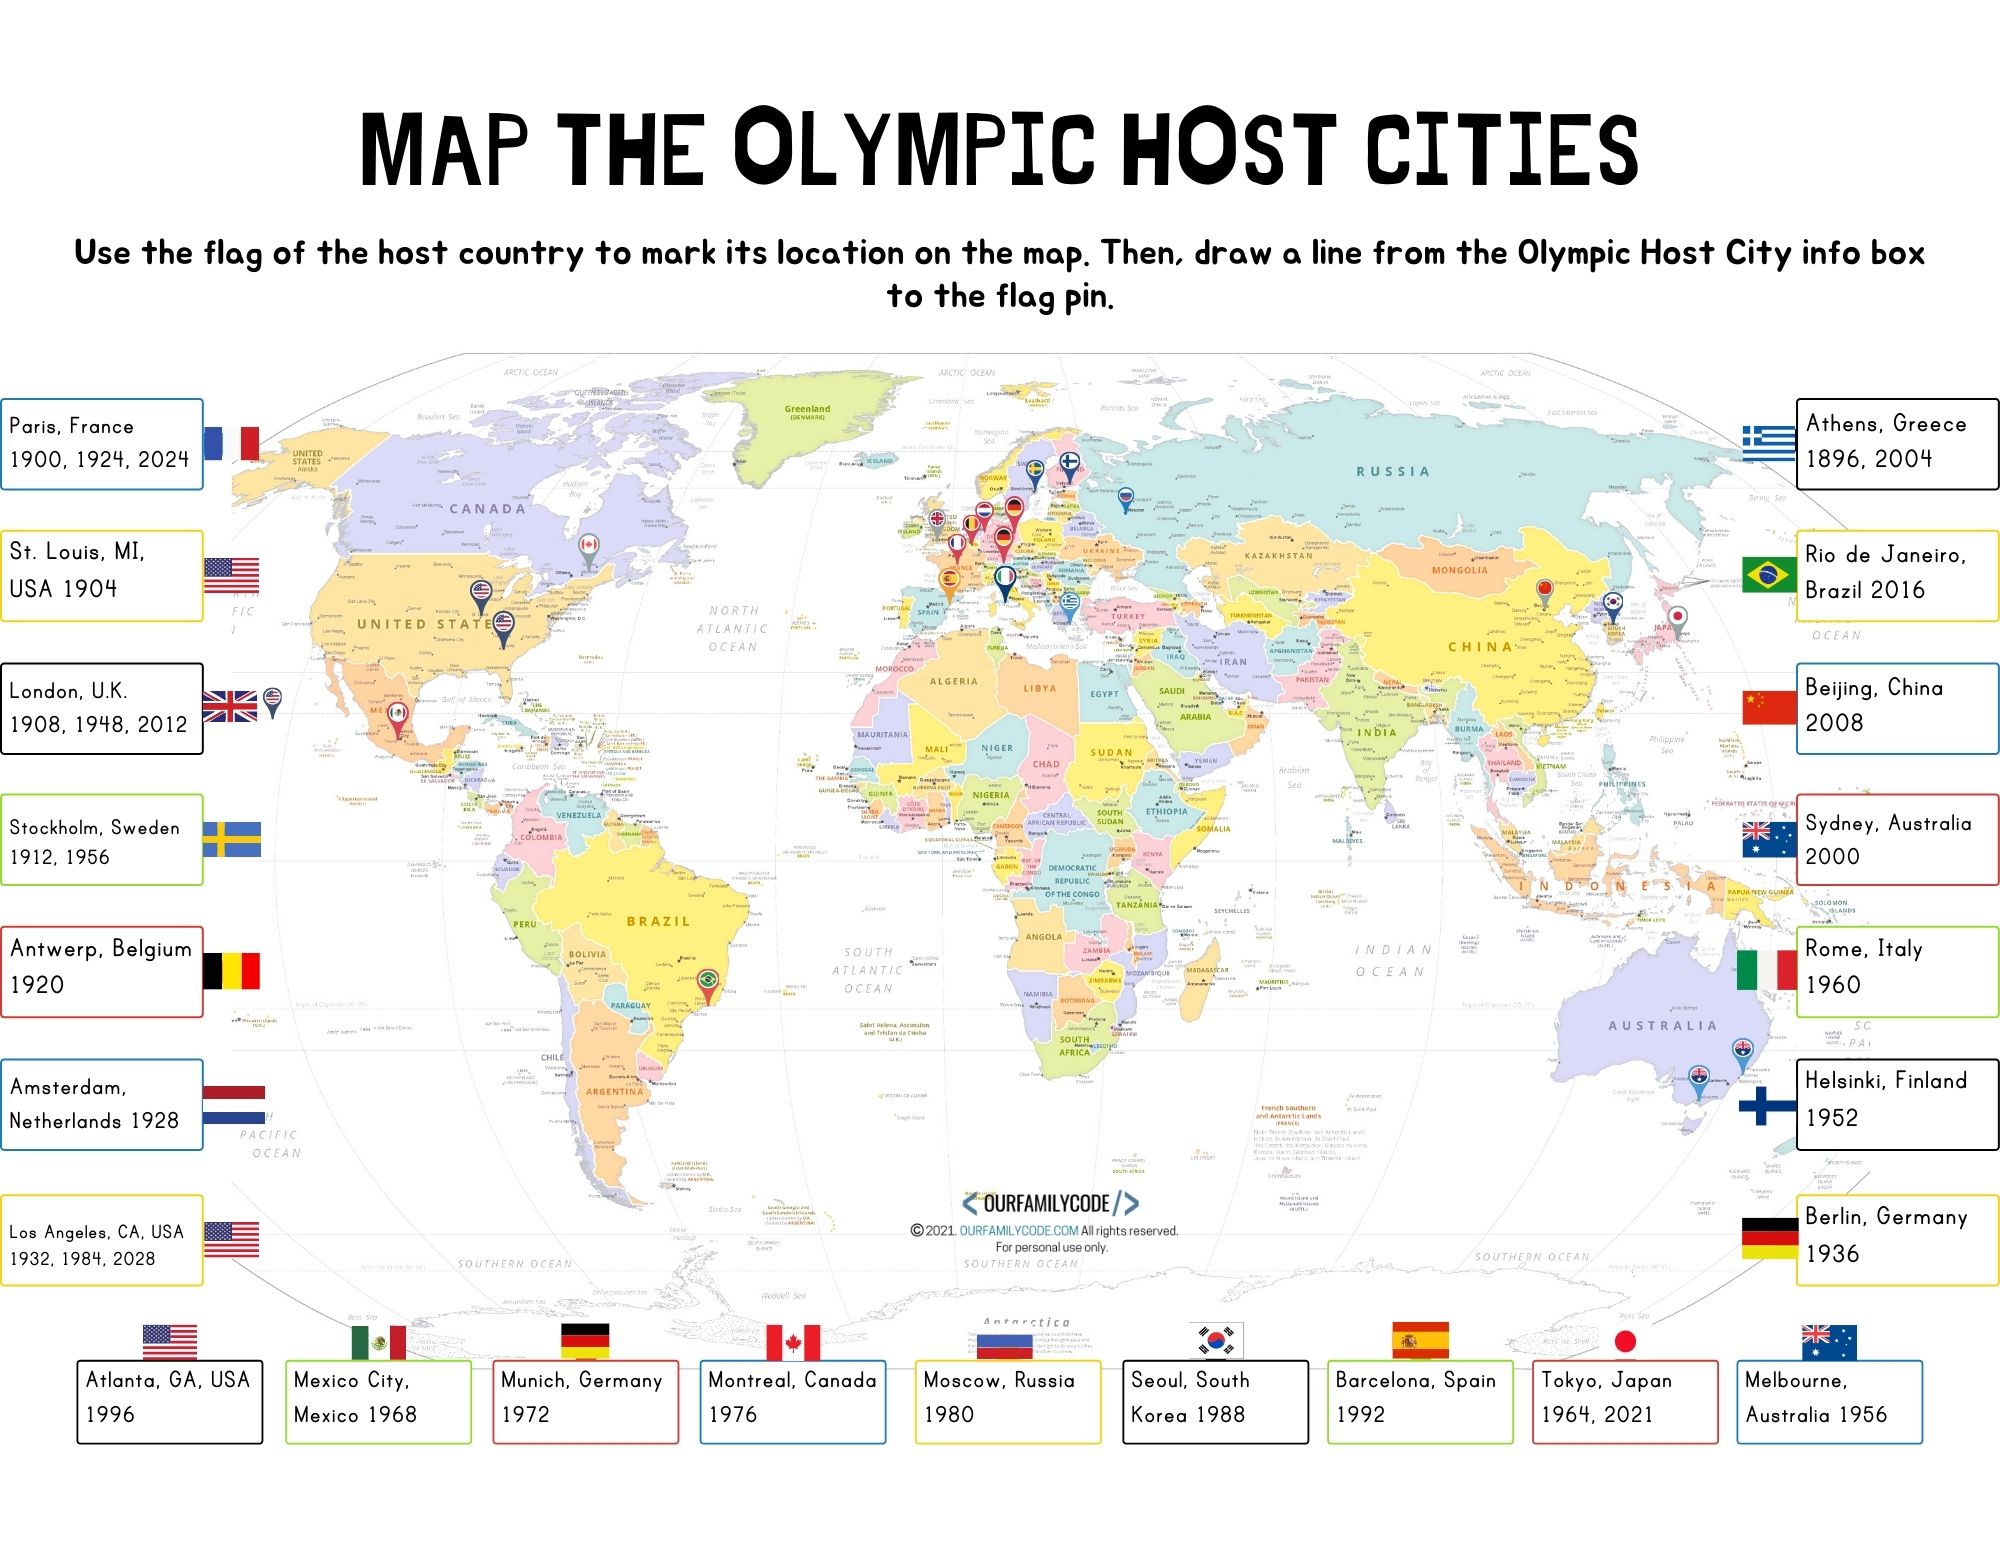 A picture of an answer key for the Map the Olympic Host Cities geography activity with locations marked by country flags.